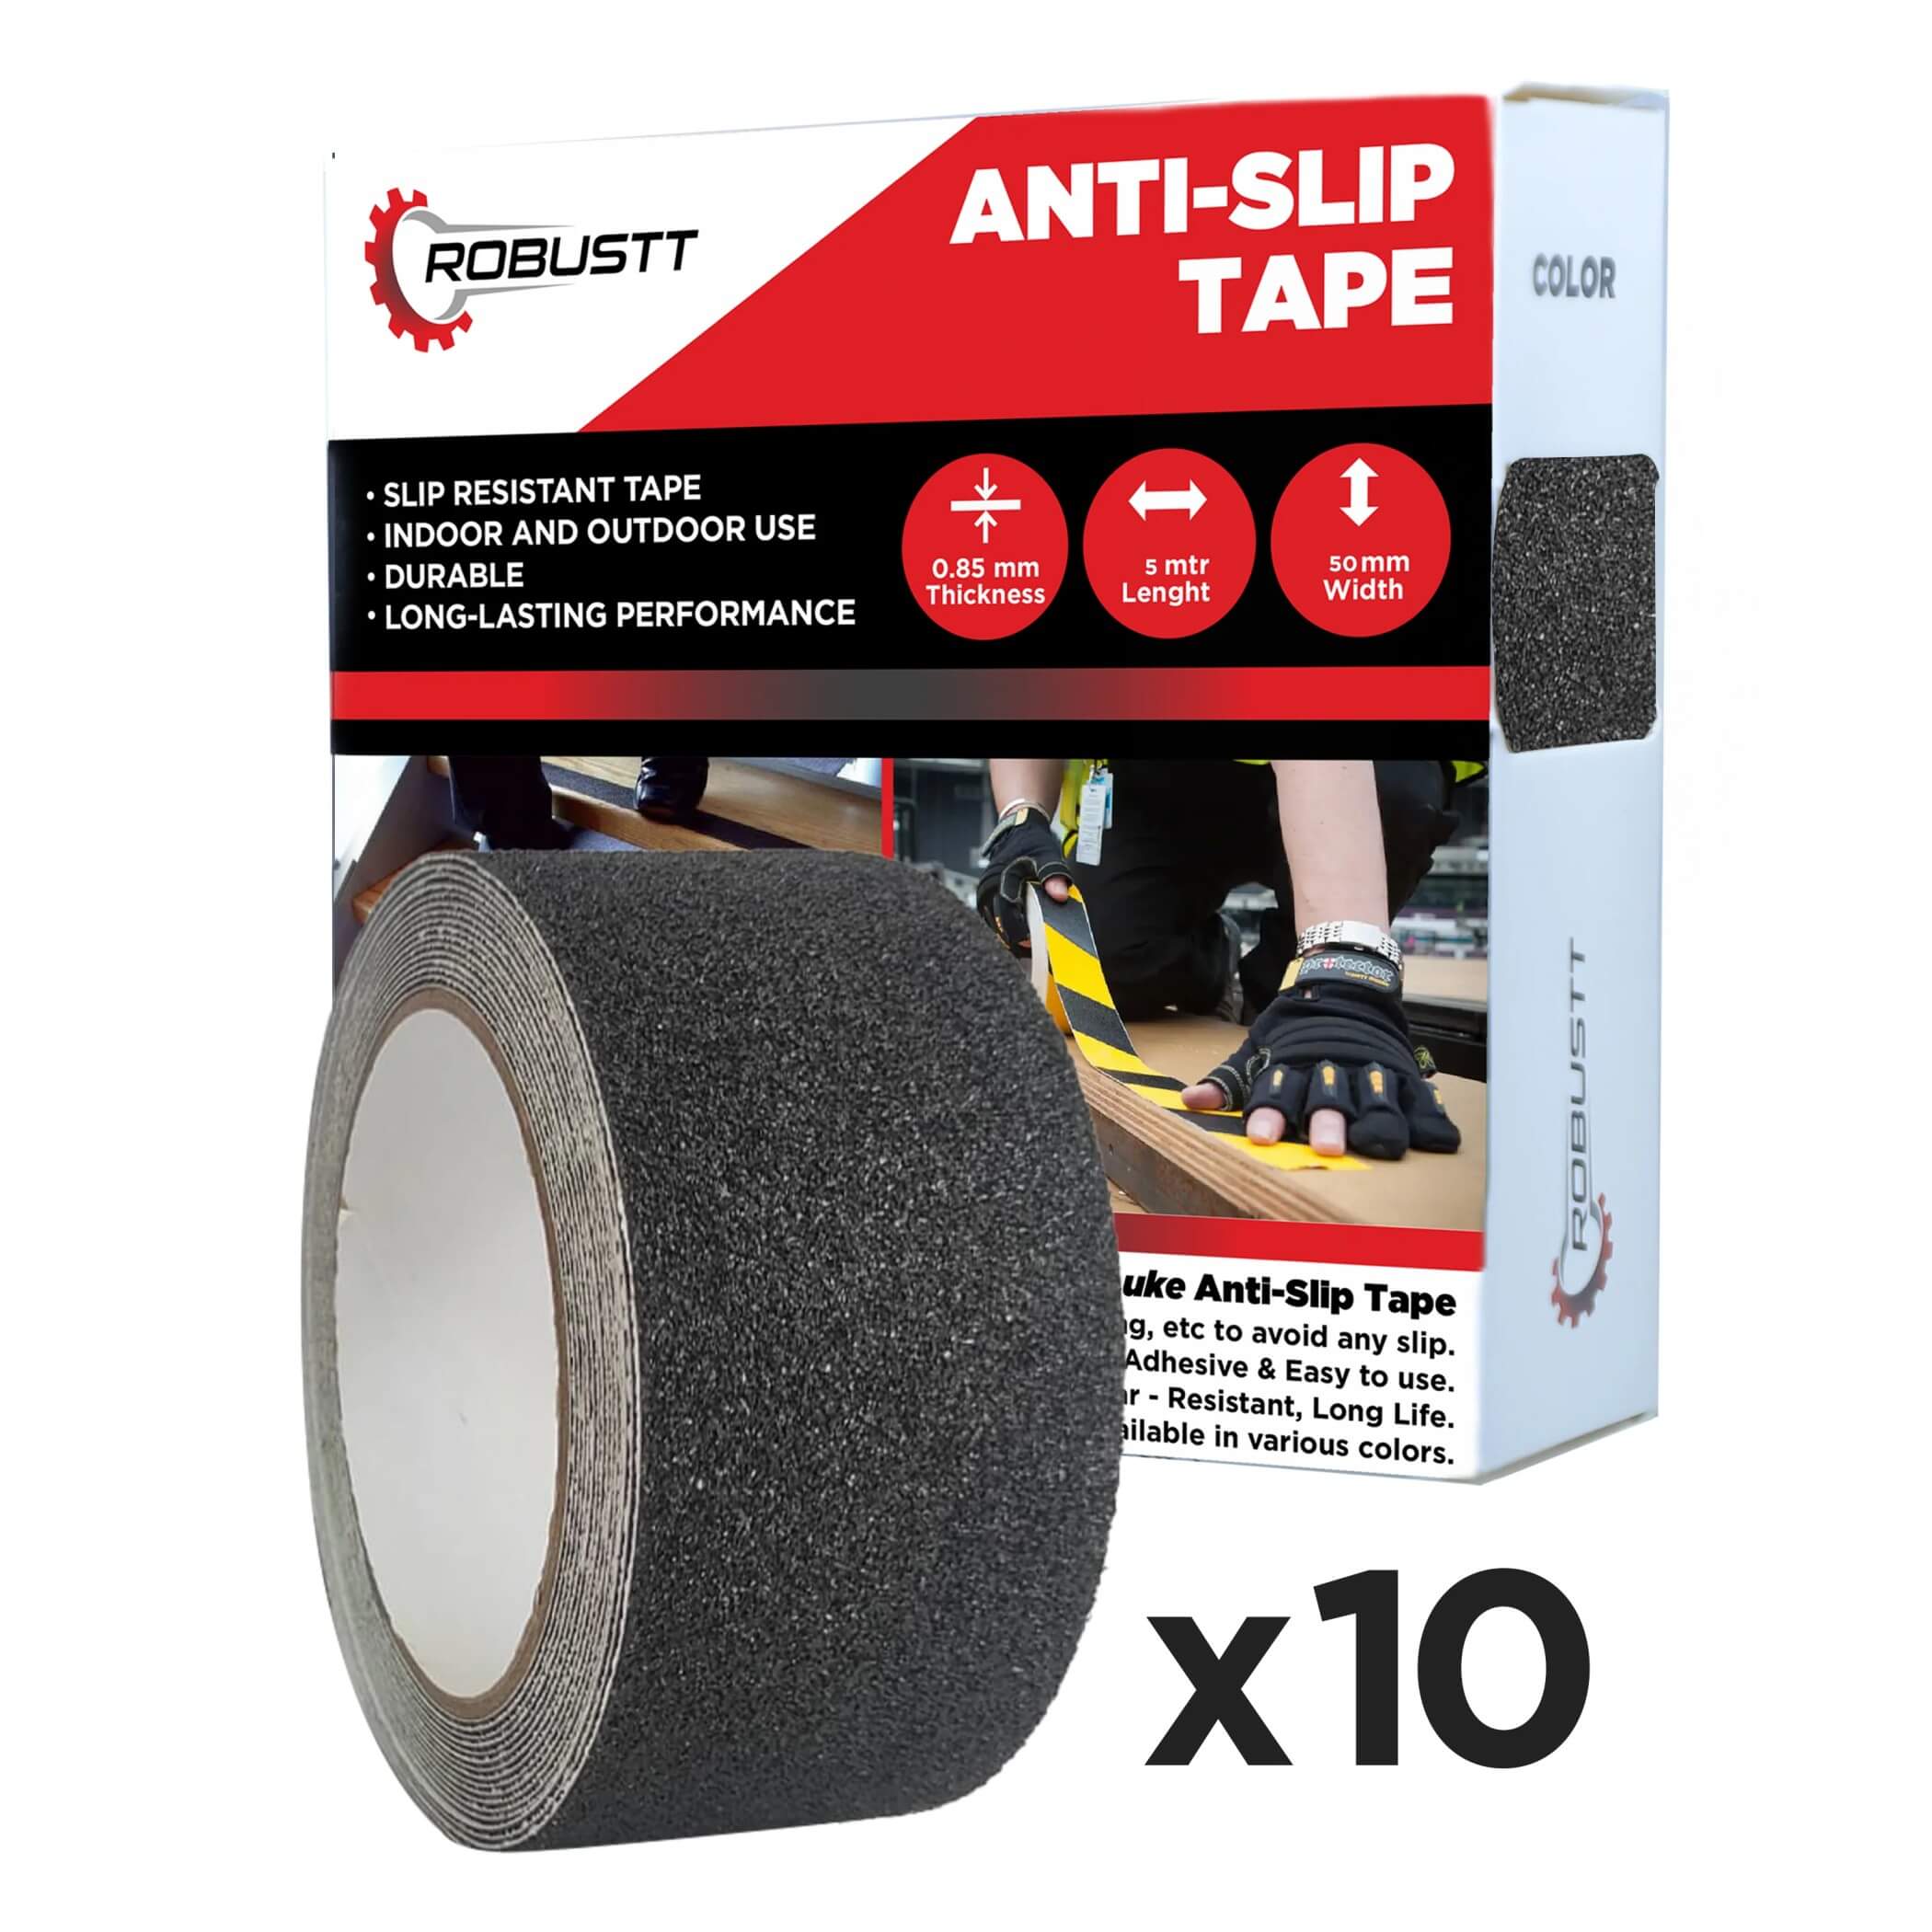 robustt-anti-skid-antislip-10mtr-guaranteed-x50mm-black-fall-resistant-with-pet-material-and-solvent-acrylic-adhesive-tape-pack-of-10